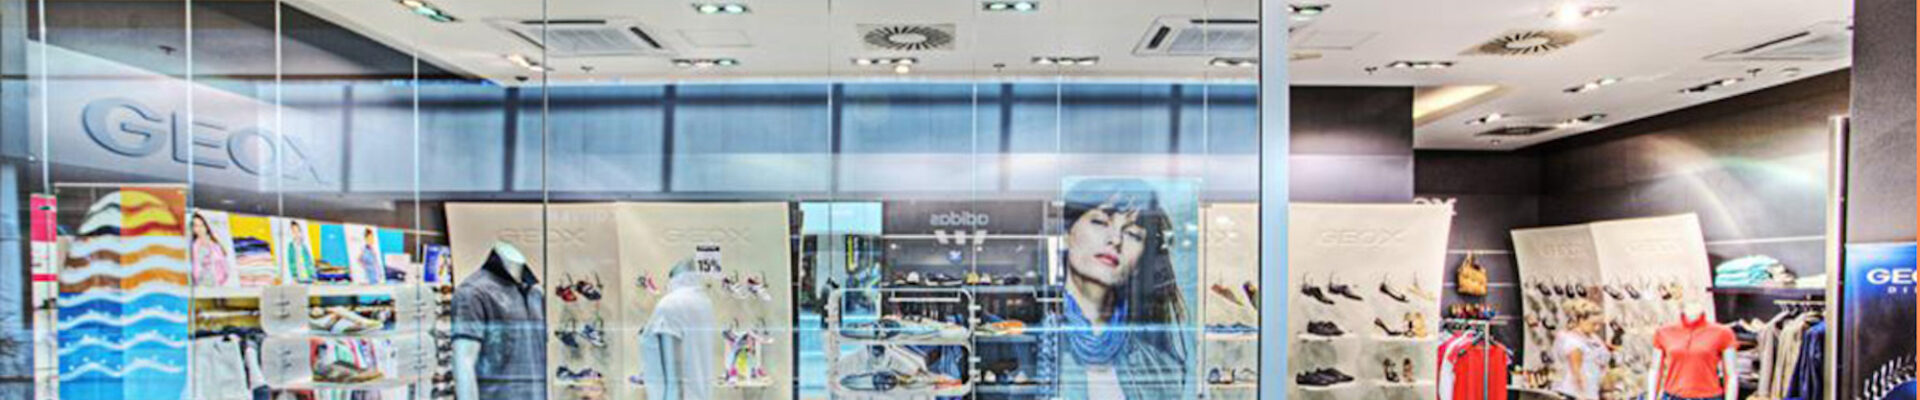 Geox Usce shoping center, Beograd